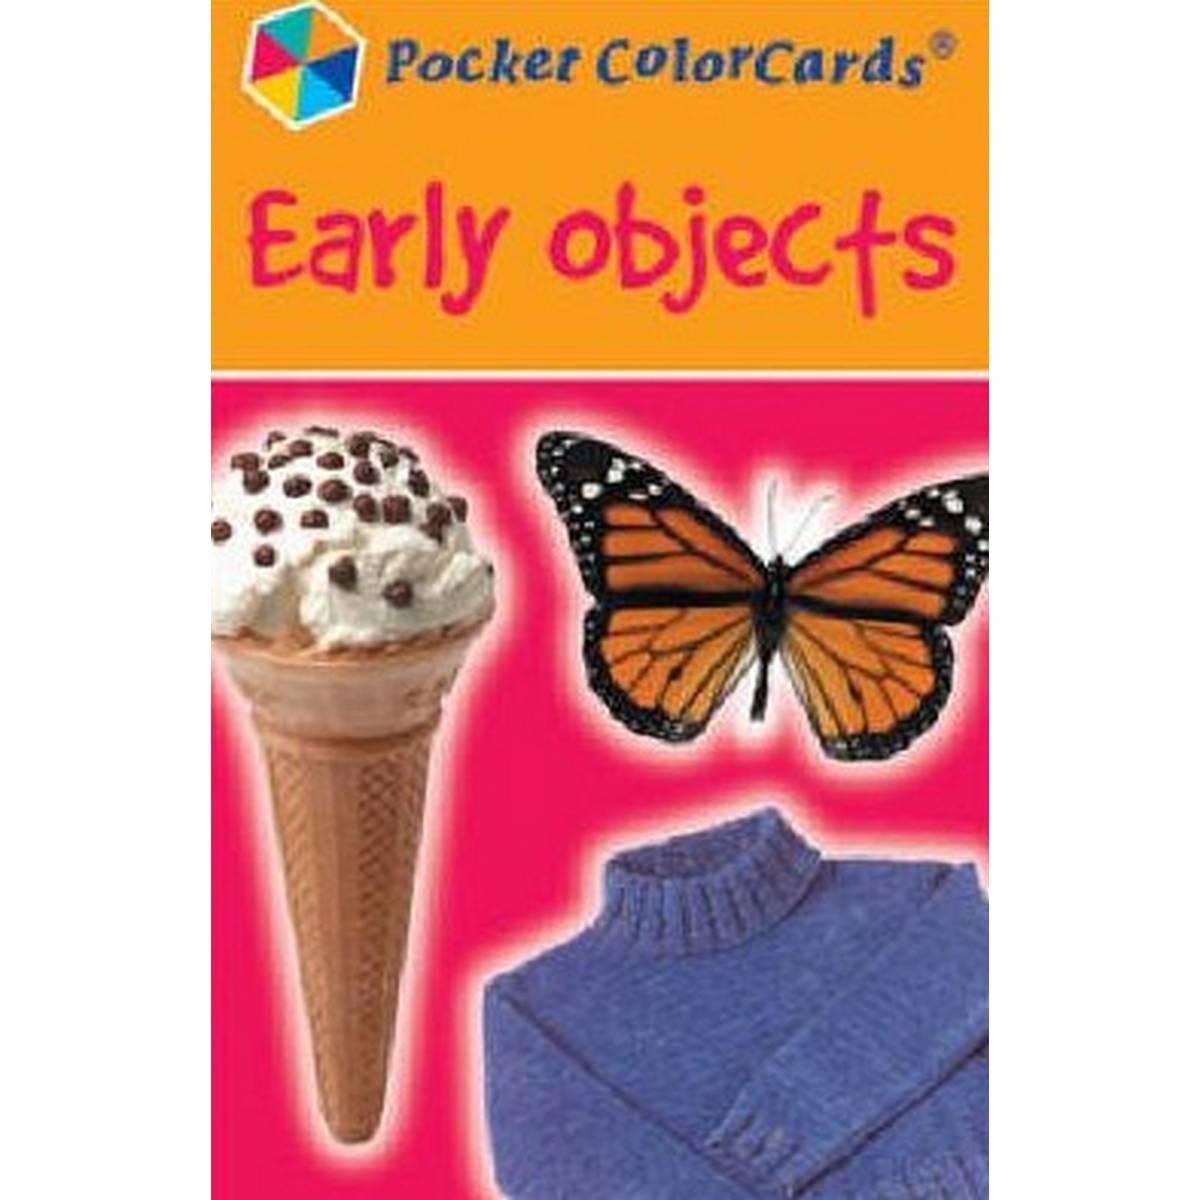 Pocket ColorCards: Early Objects